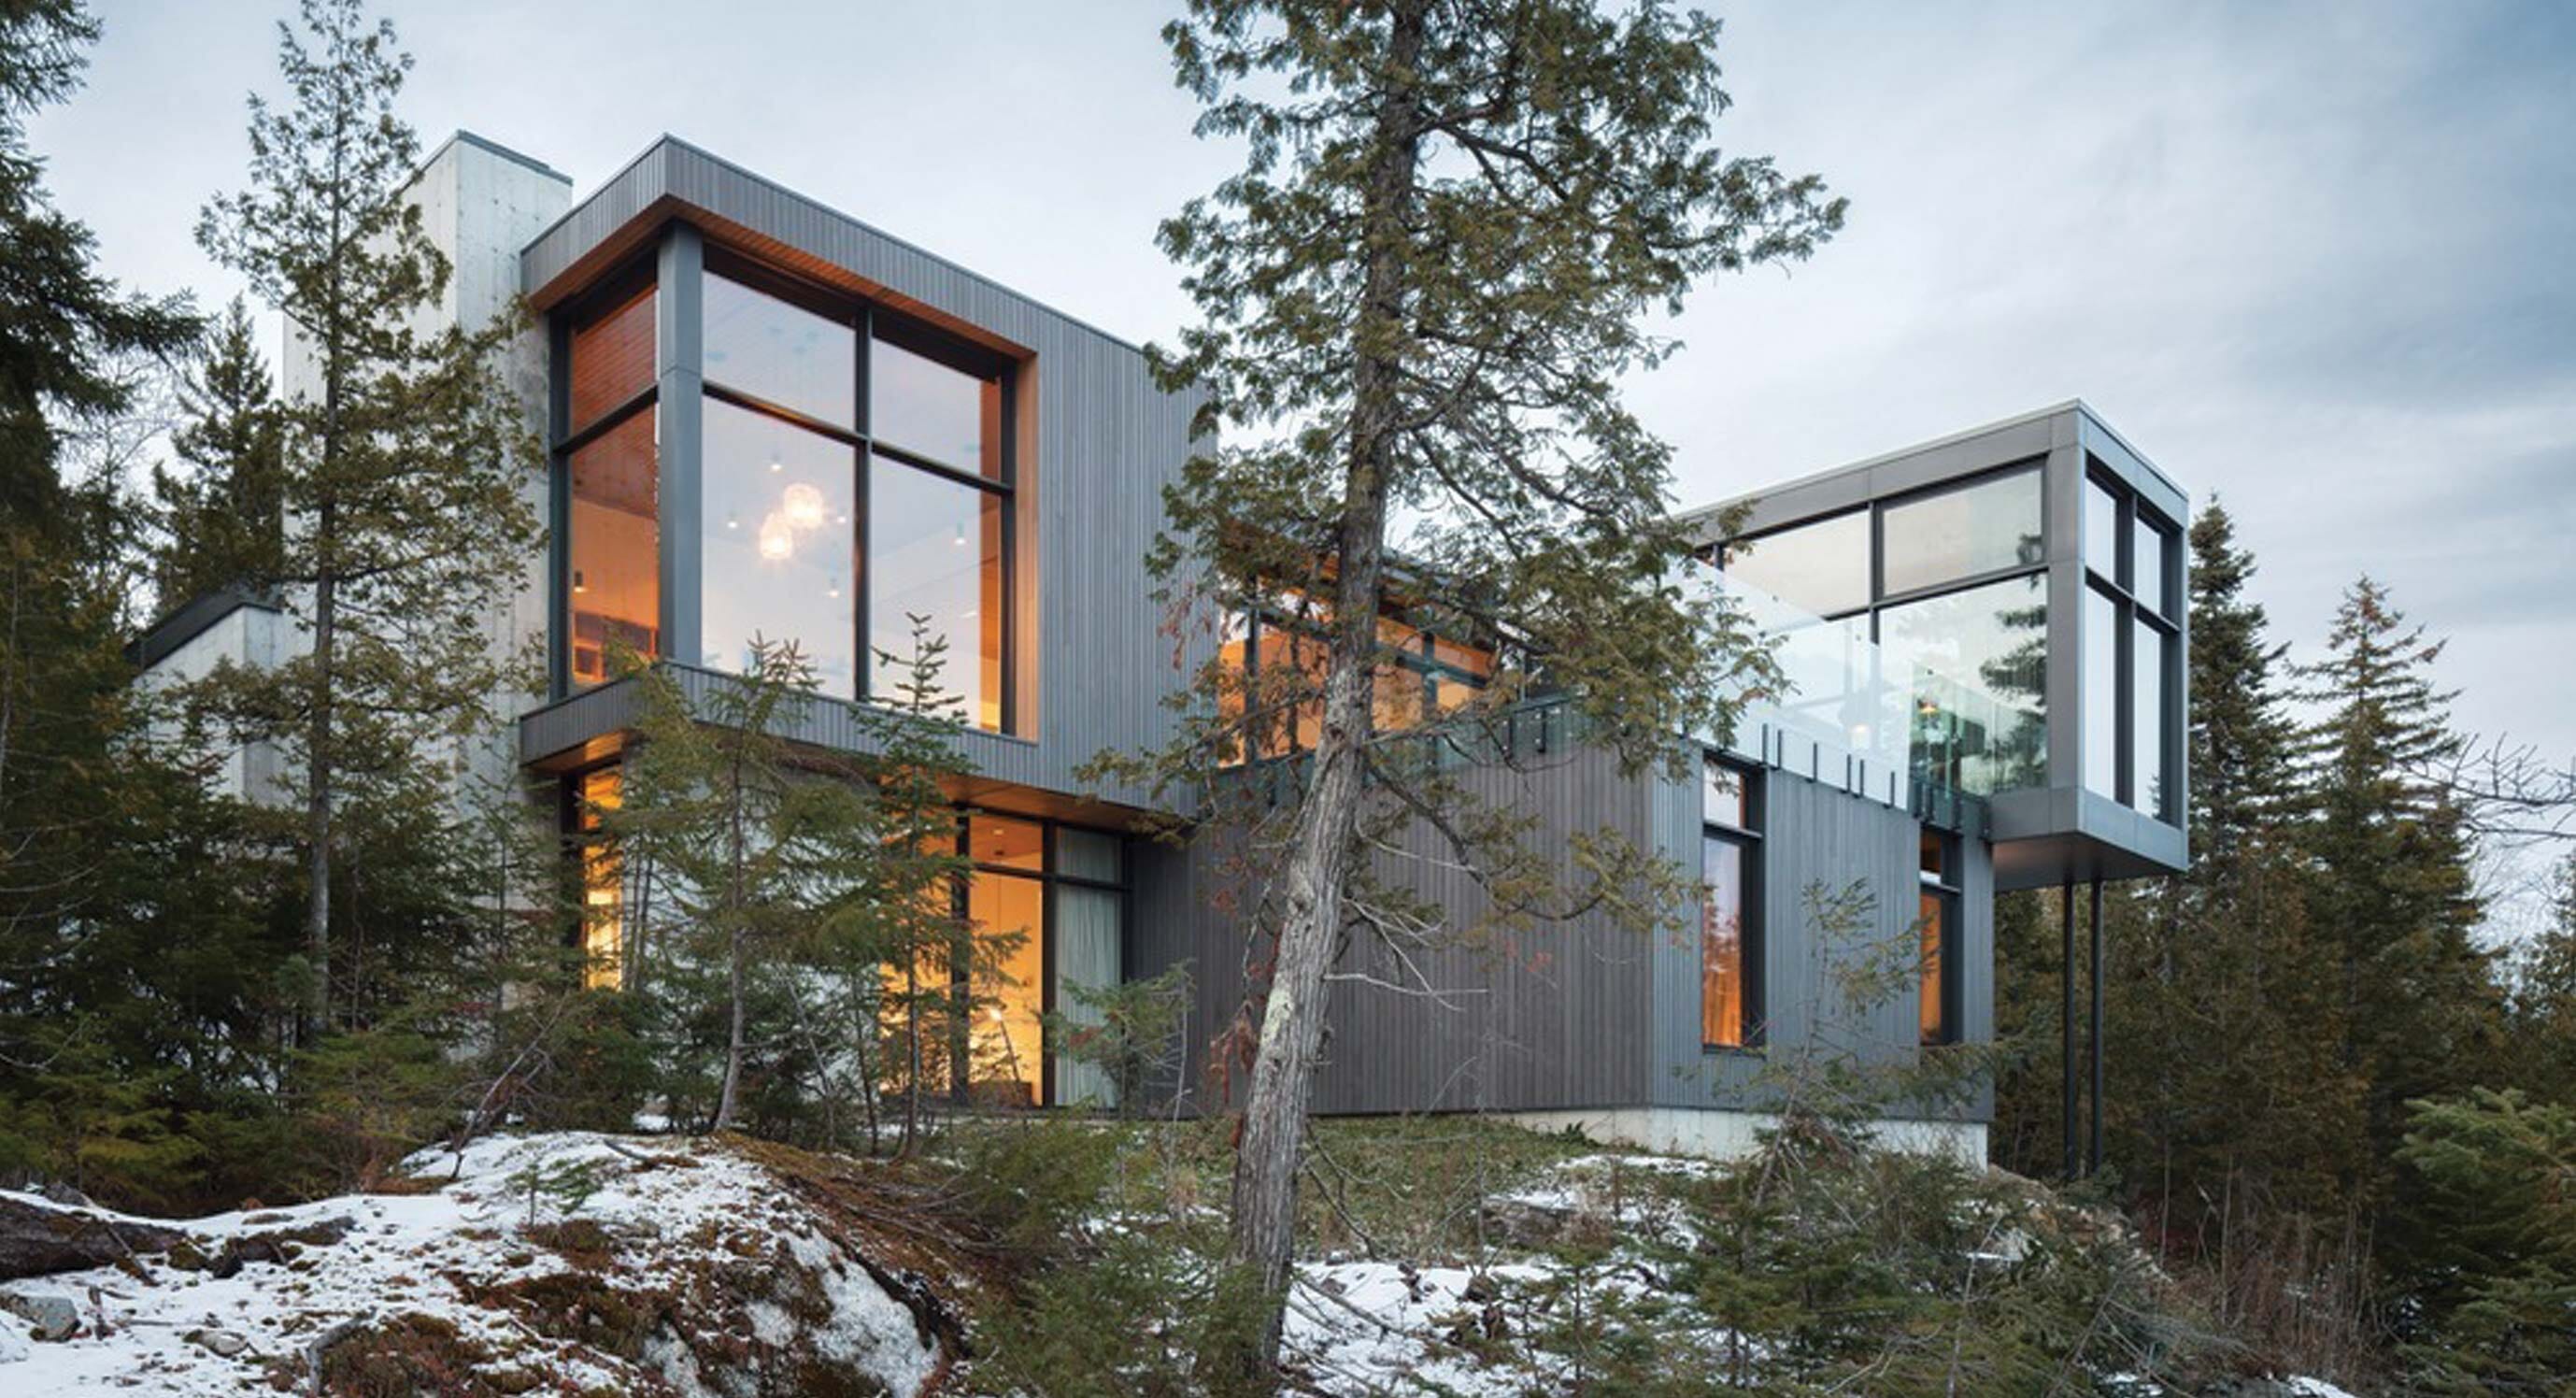 Thellend Fortin Architectes' Long Horizontals House Is a Mountain Haven